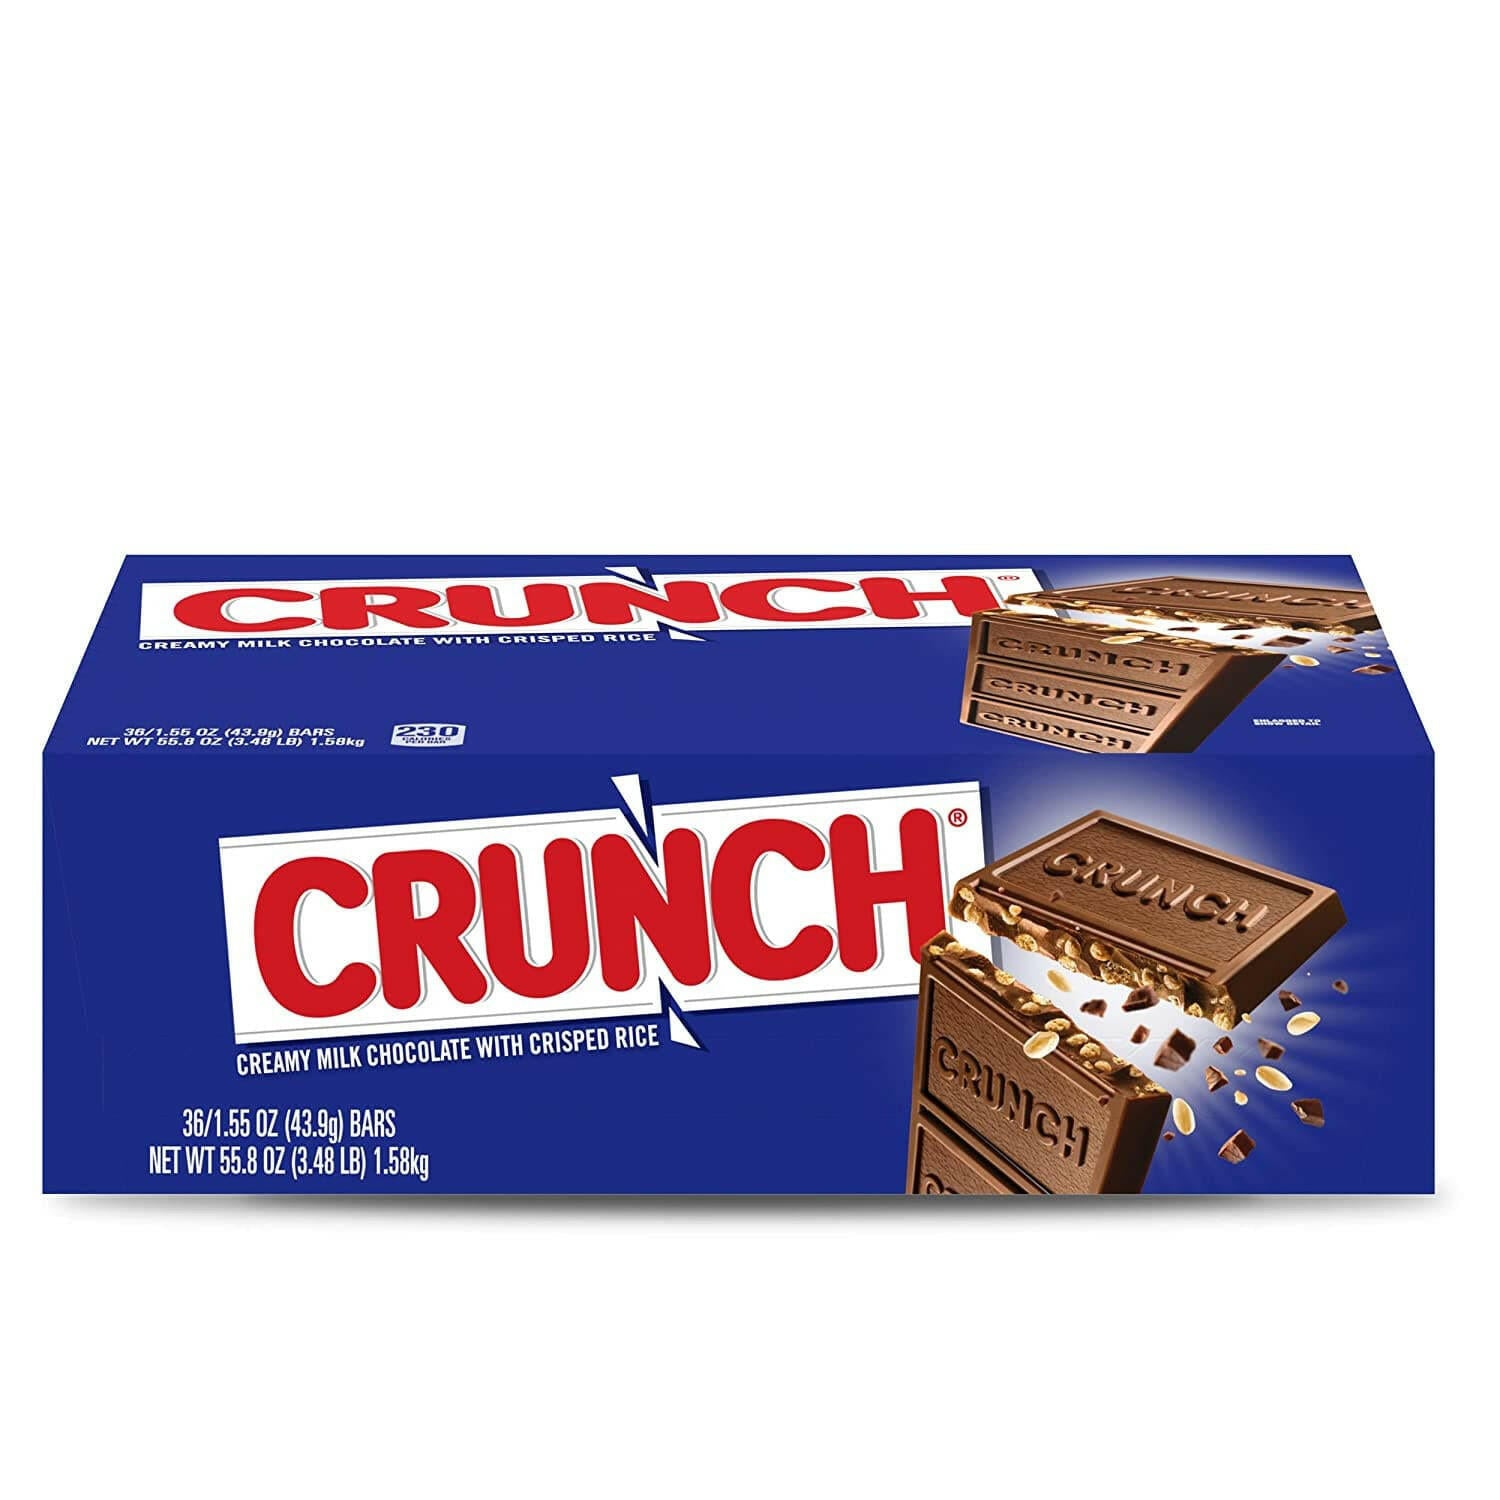 Crunch, Milk Chocolate And Crisped Rice, 55.8 Oz, 36 Count.